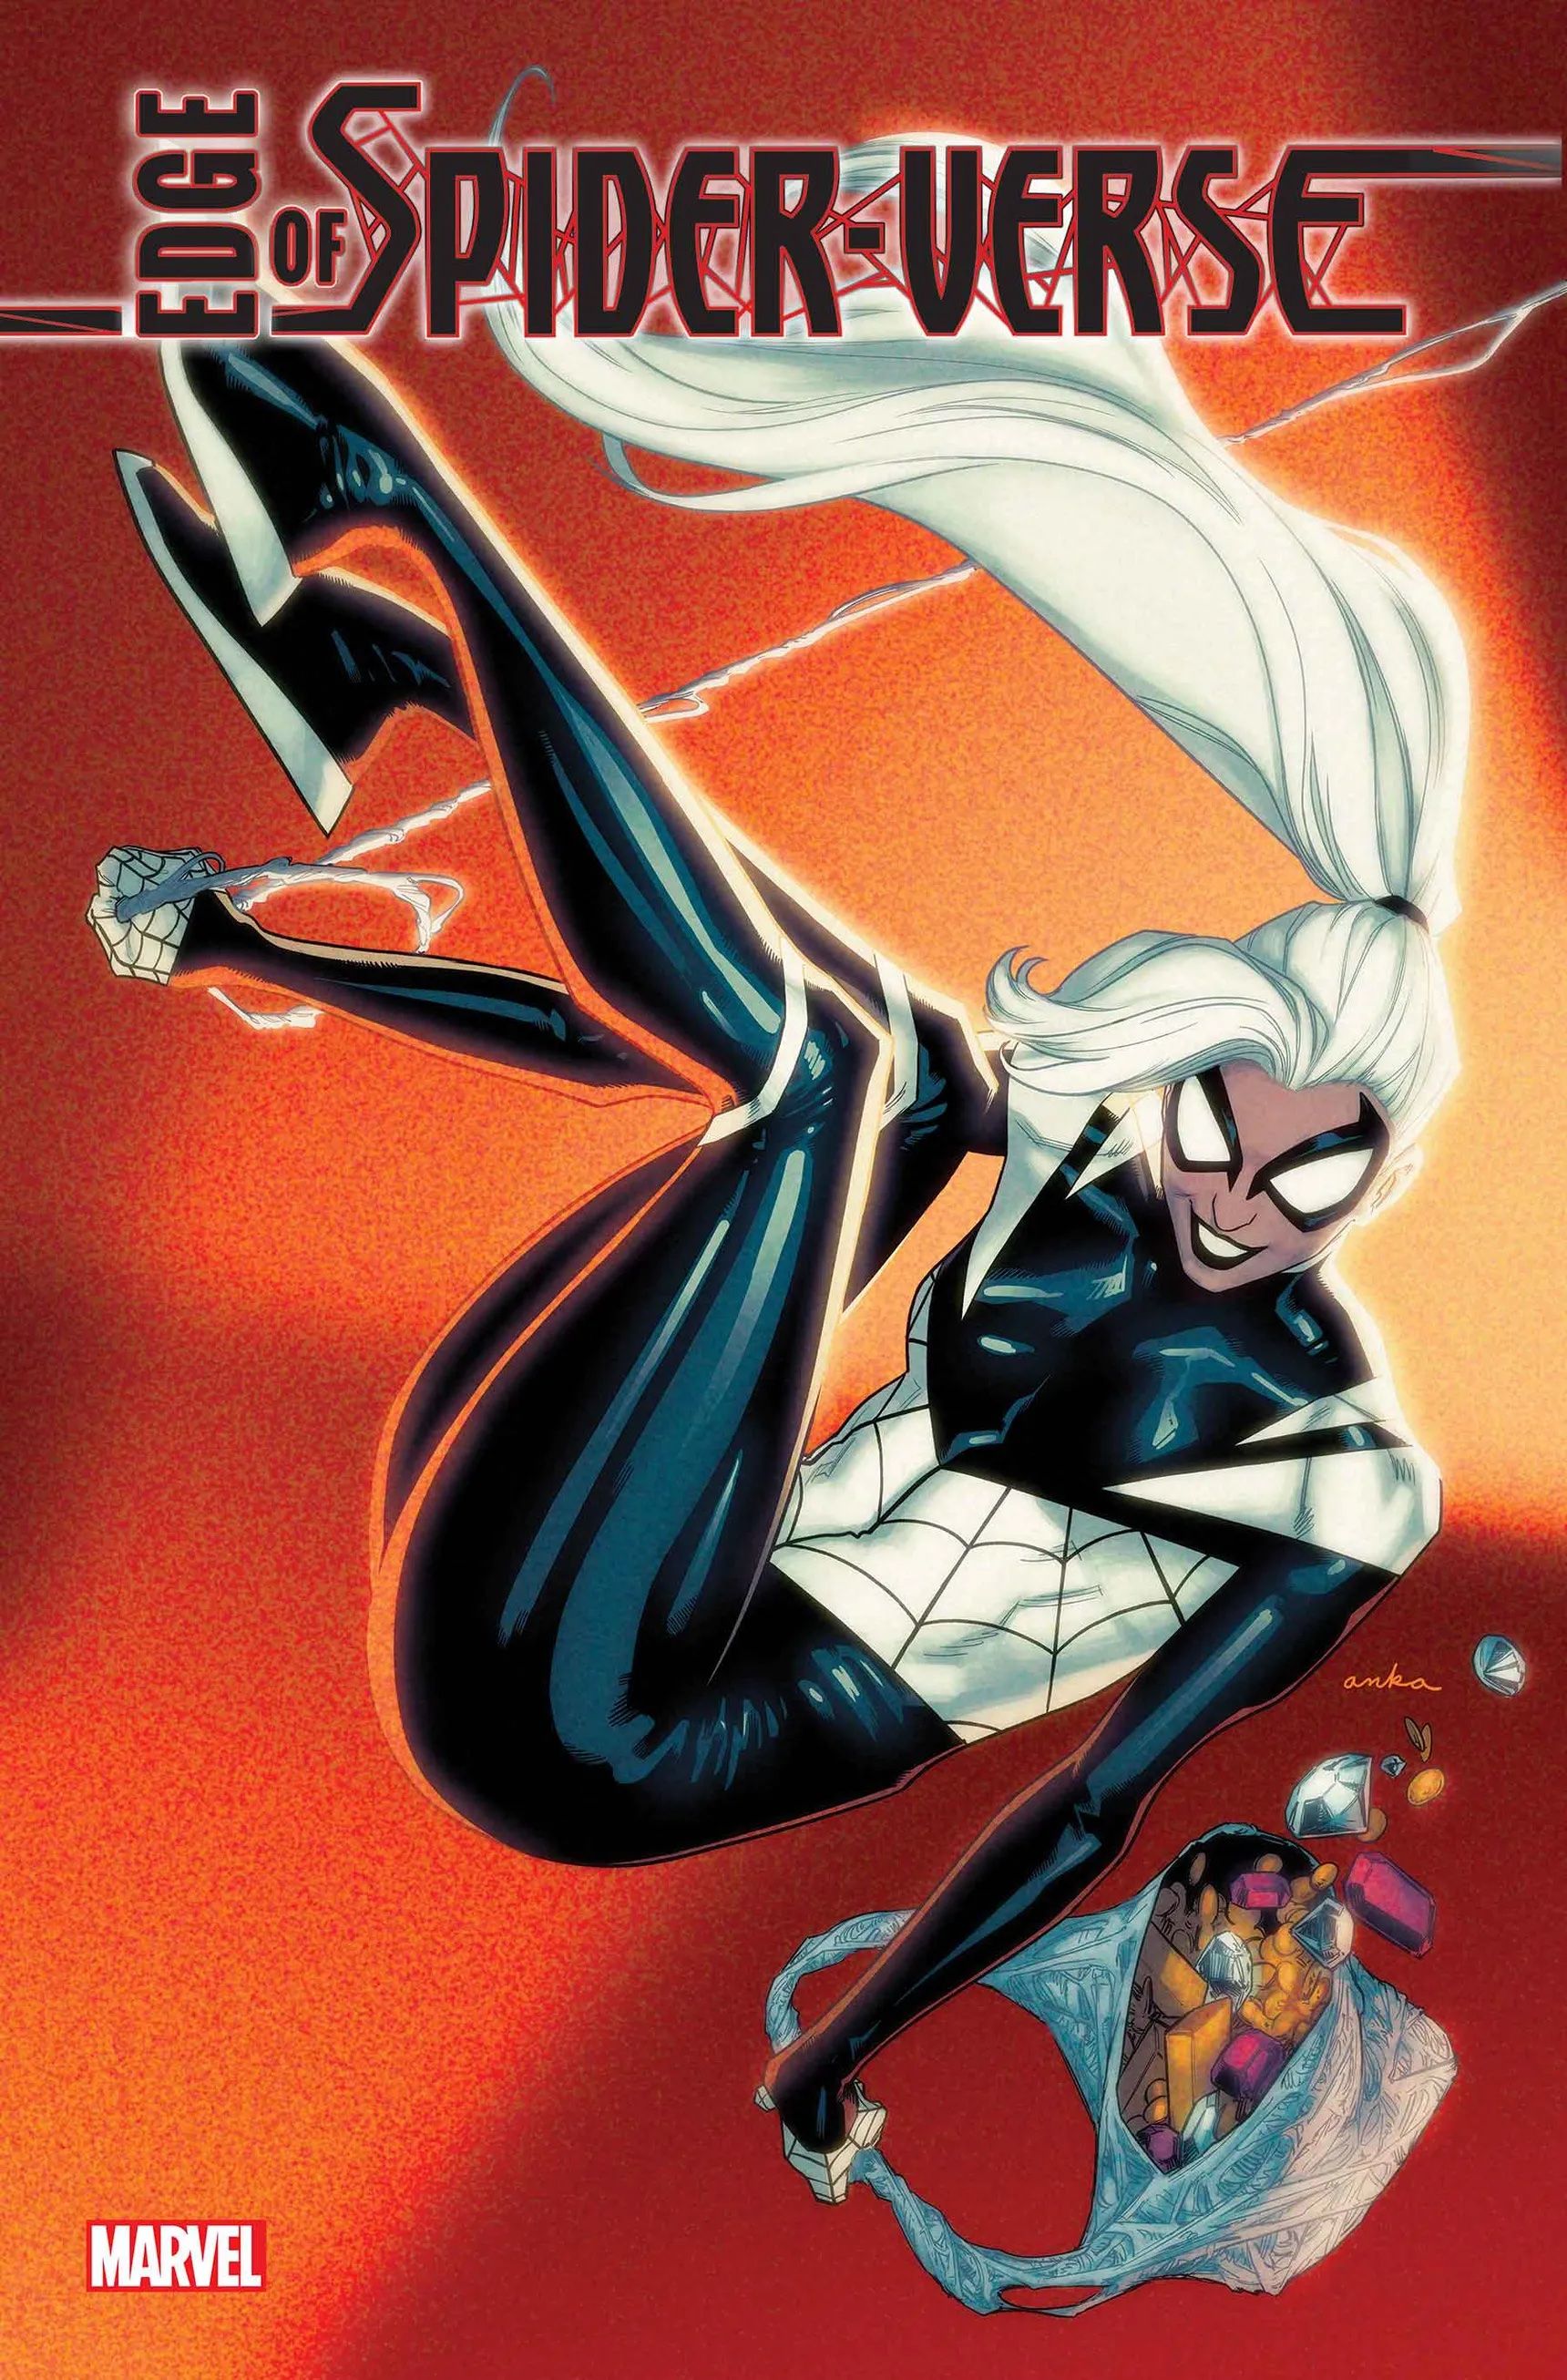 Marvel's Newest Spider-Verse Hero is the Night-Spider, aka Felicia Hardy